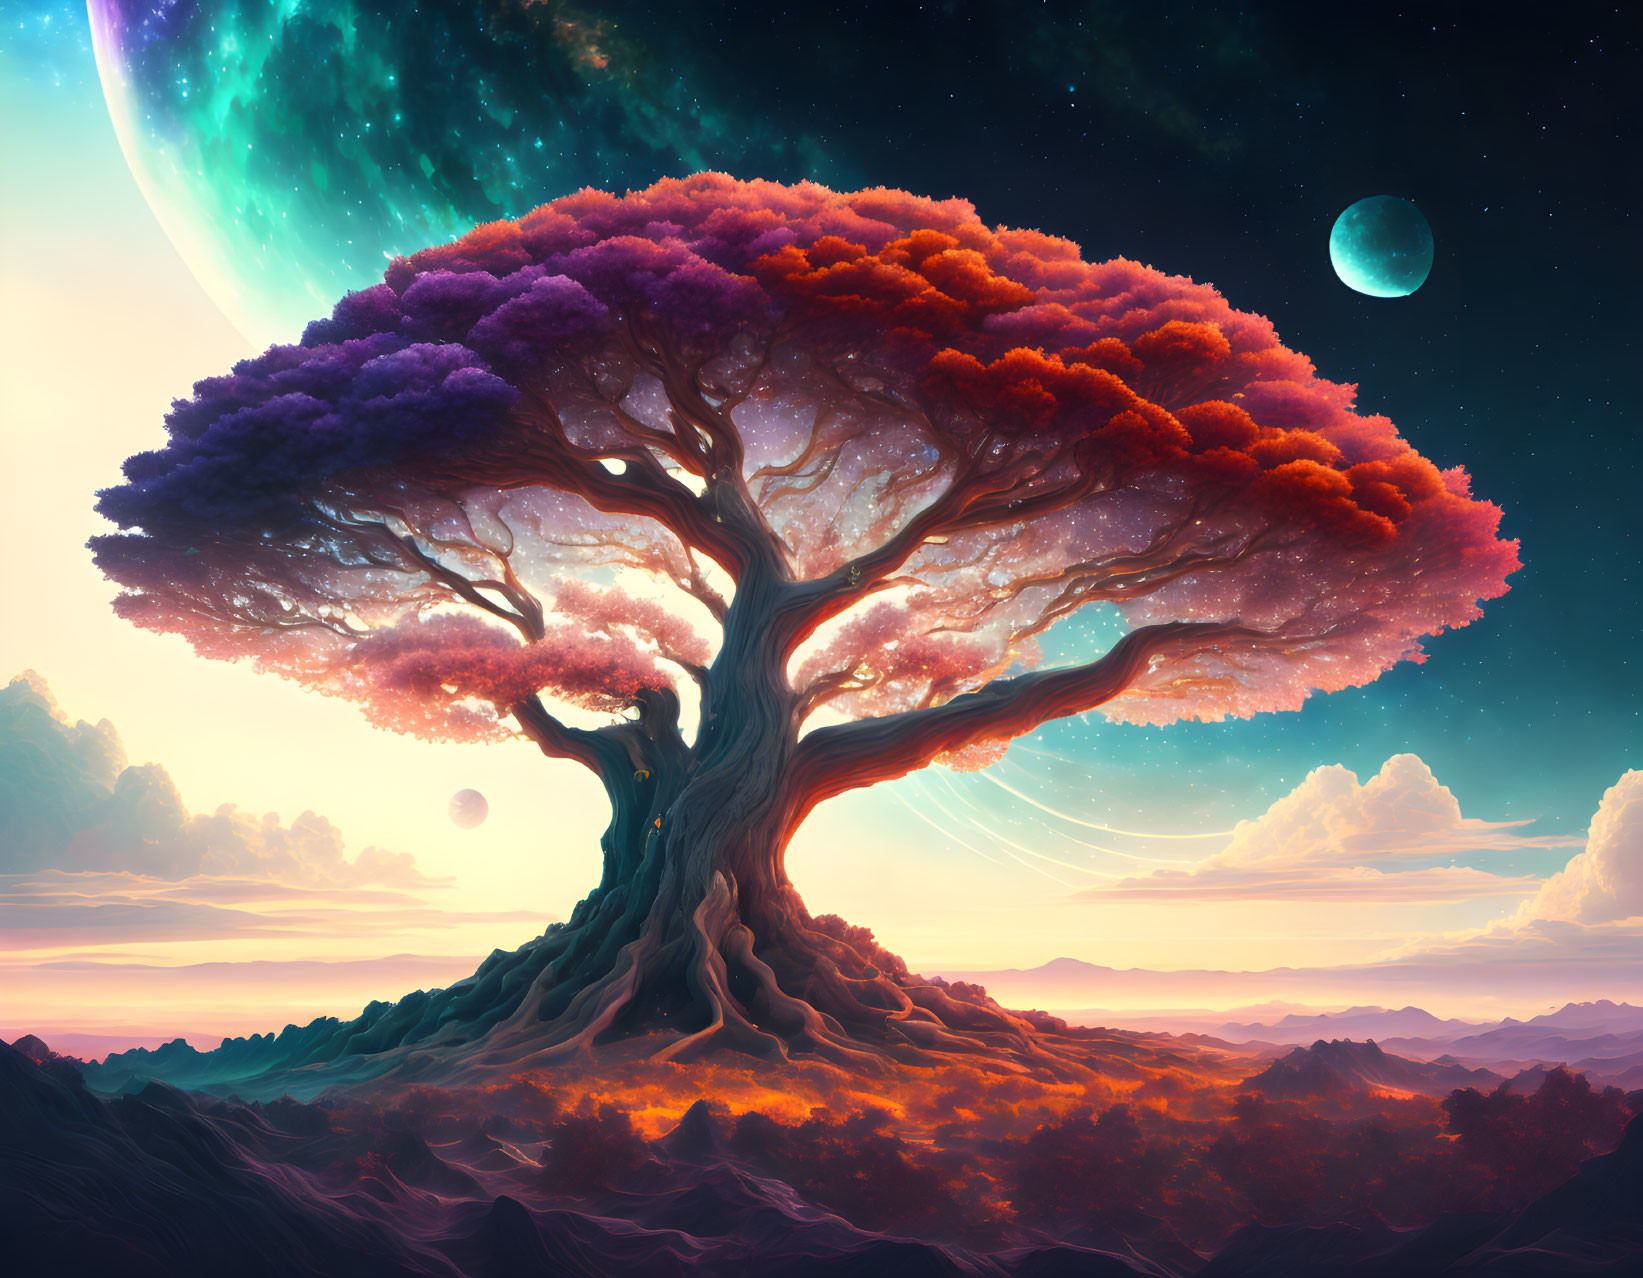 Surreal landscape with colossal fiery tree and celestial backdrop